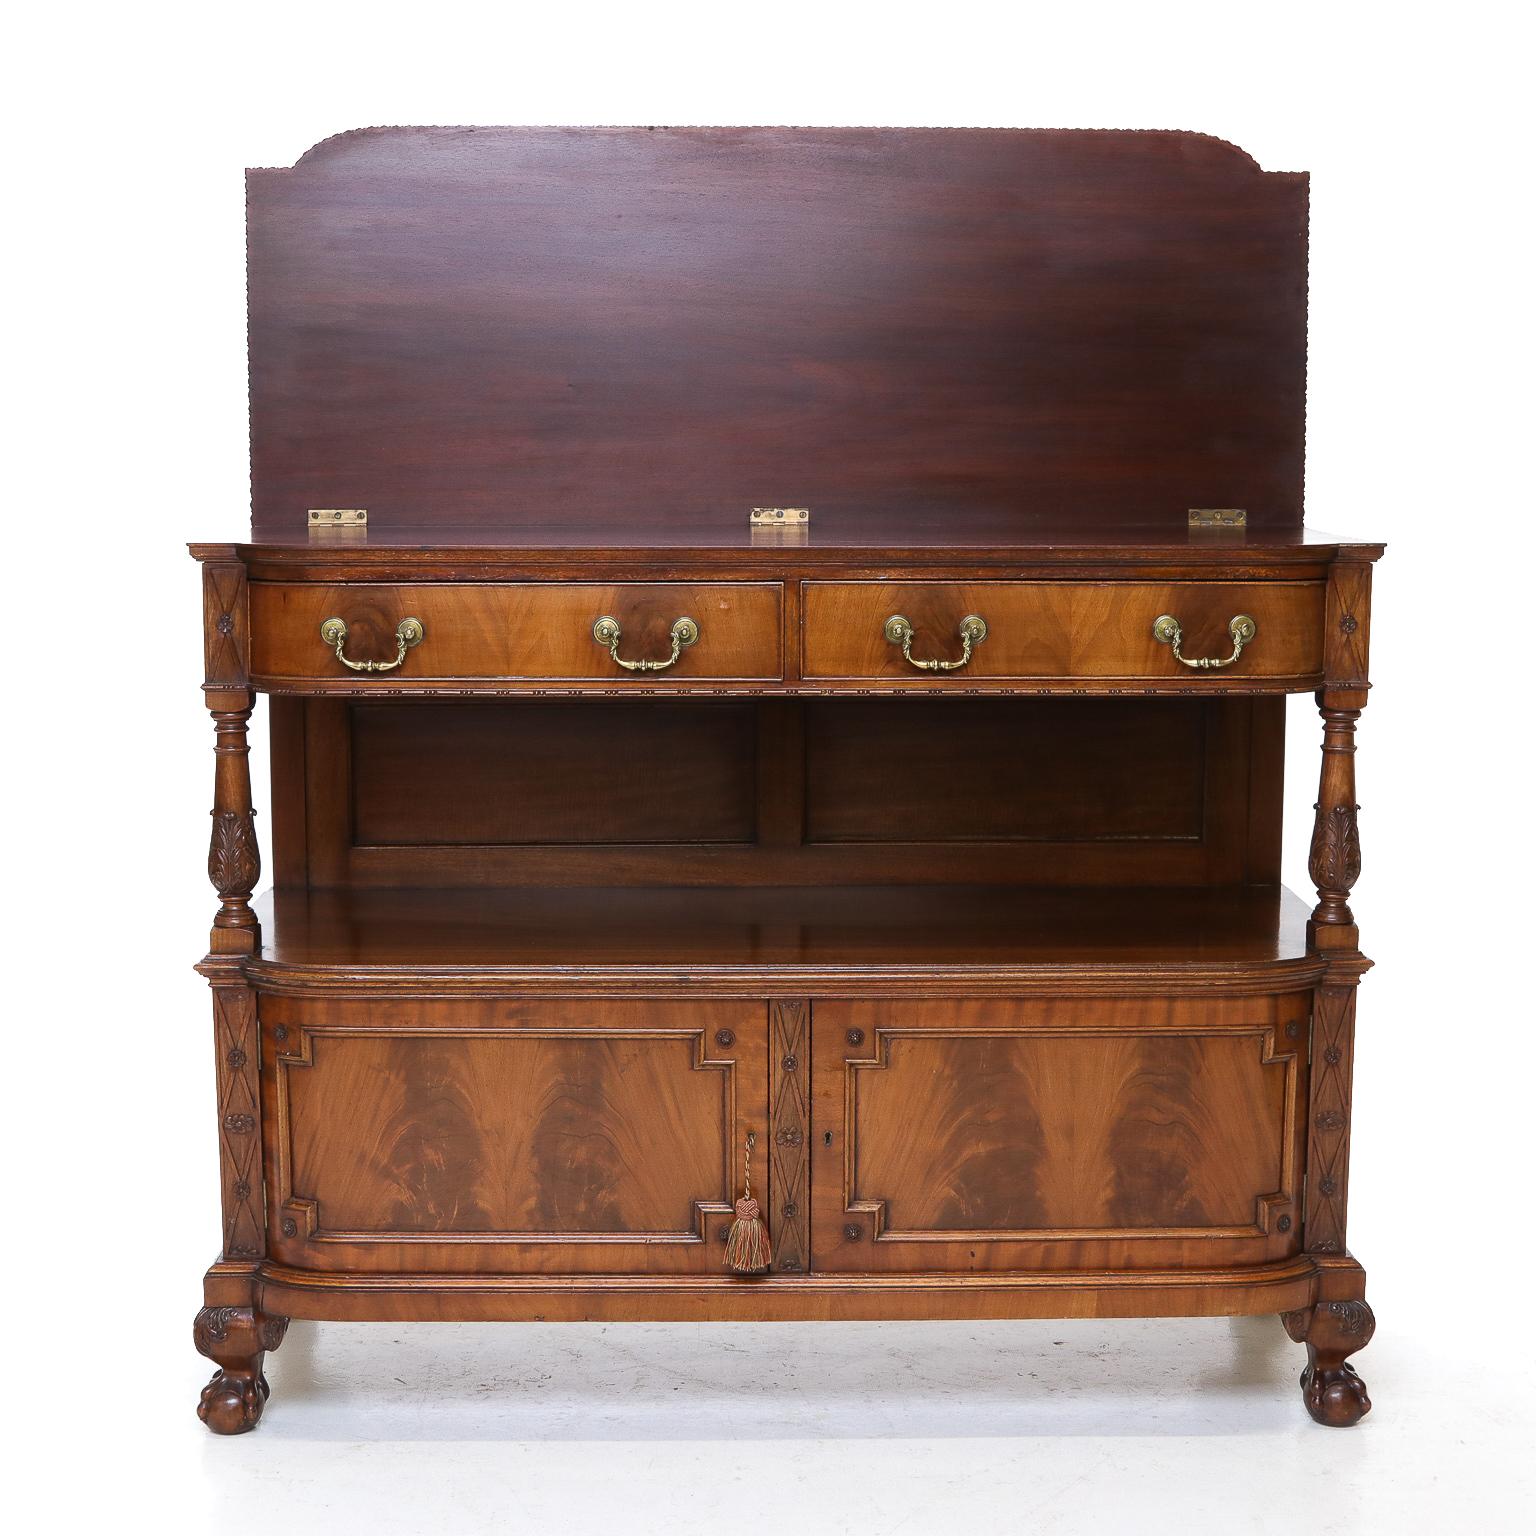 19th century Sopwith & Co. English Mahogany Server with Lift Top having two small drawers over an open cupboard with two panel cupboard doors below. The server sits atop ball and claw feet with carved knees.

Manufacturer is Sopwith & Co. out of